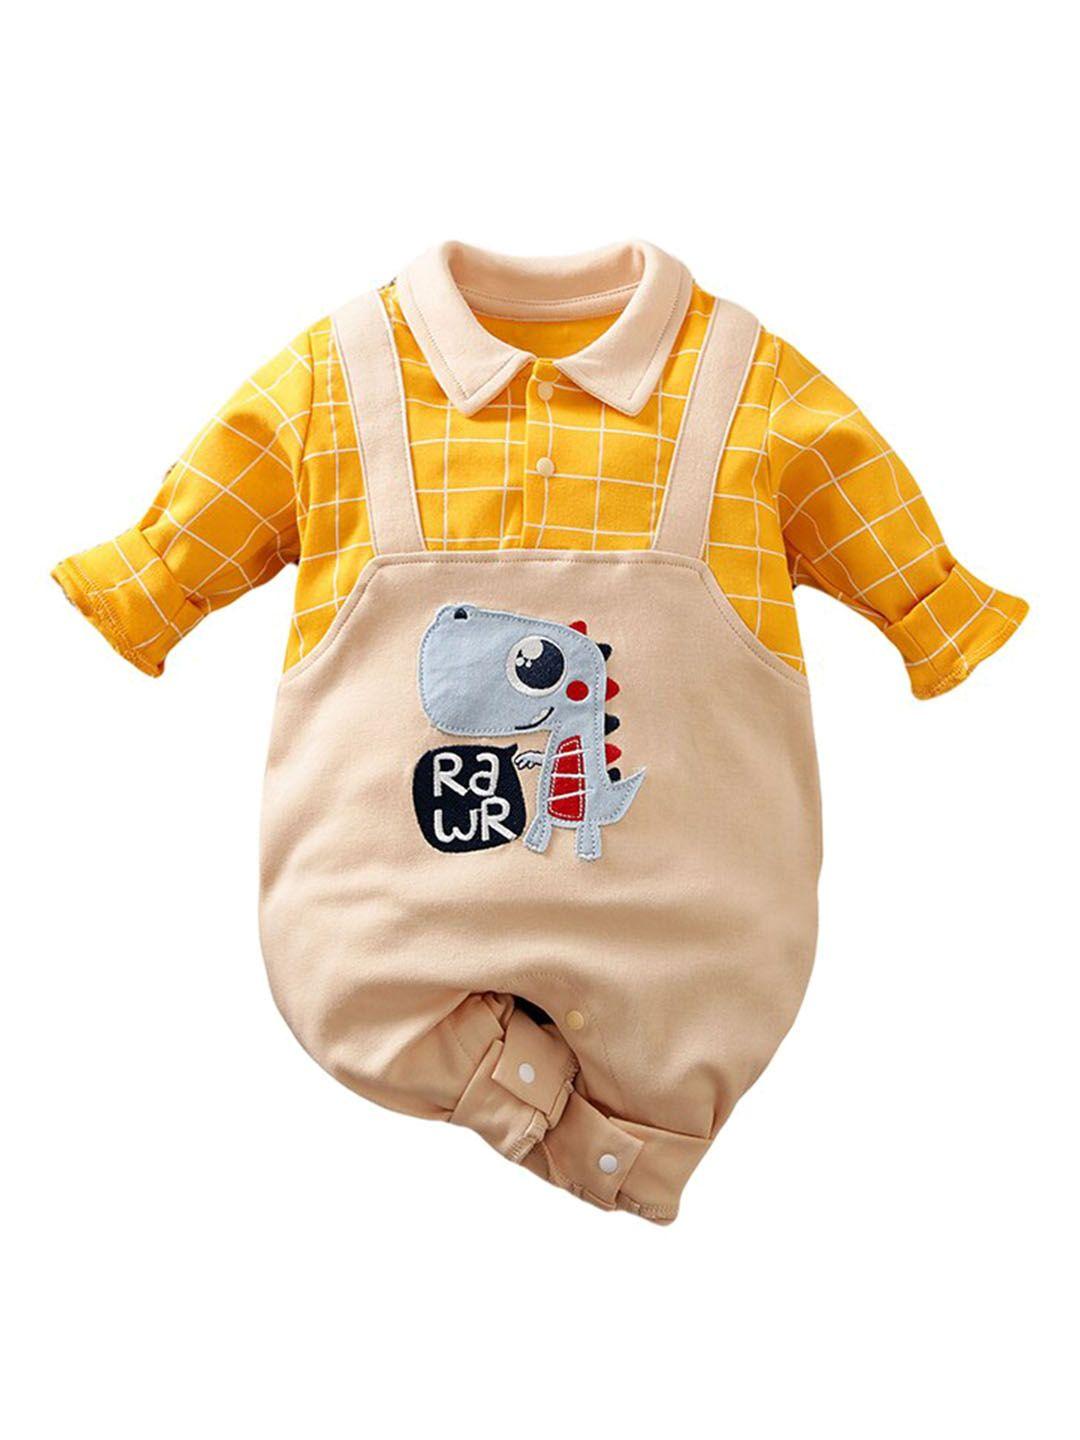 stylecast infants kids yellow & beige checked cotton rompers